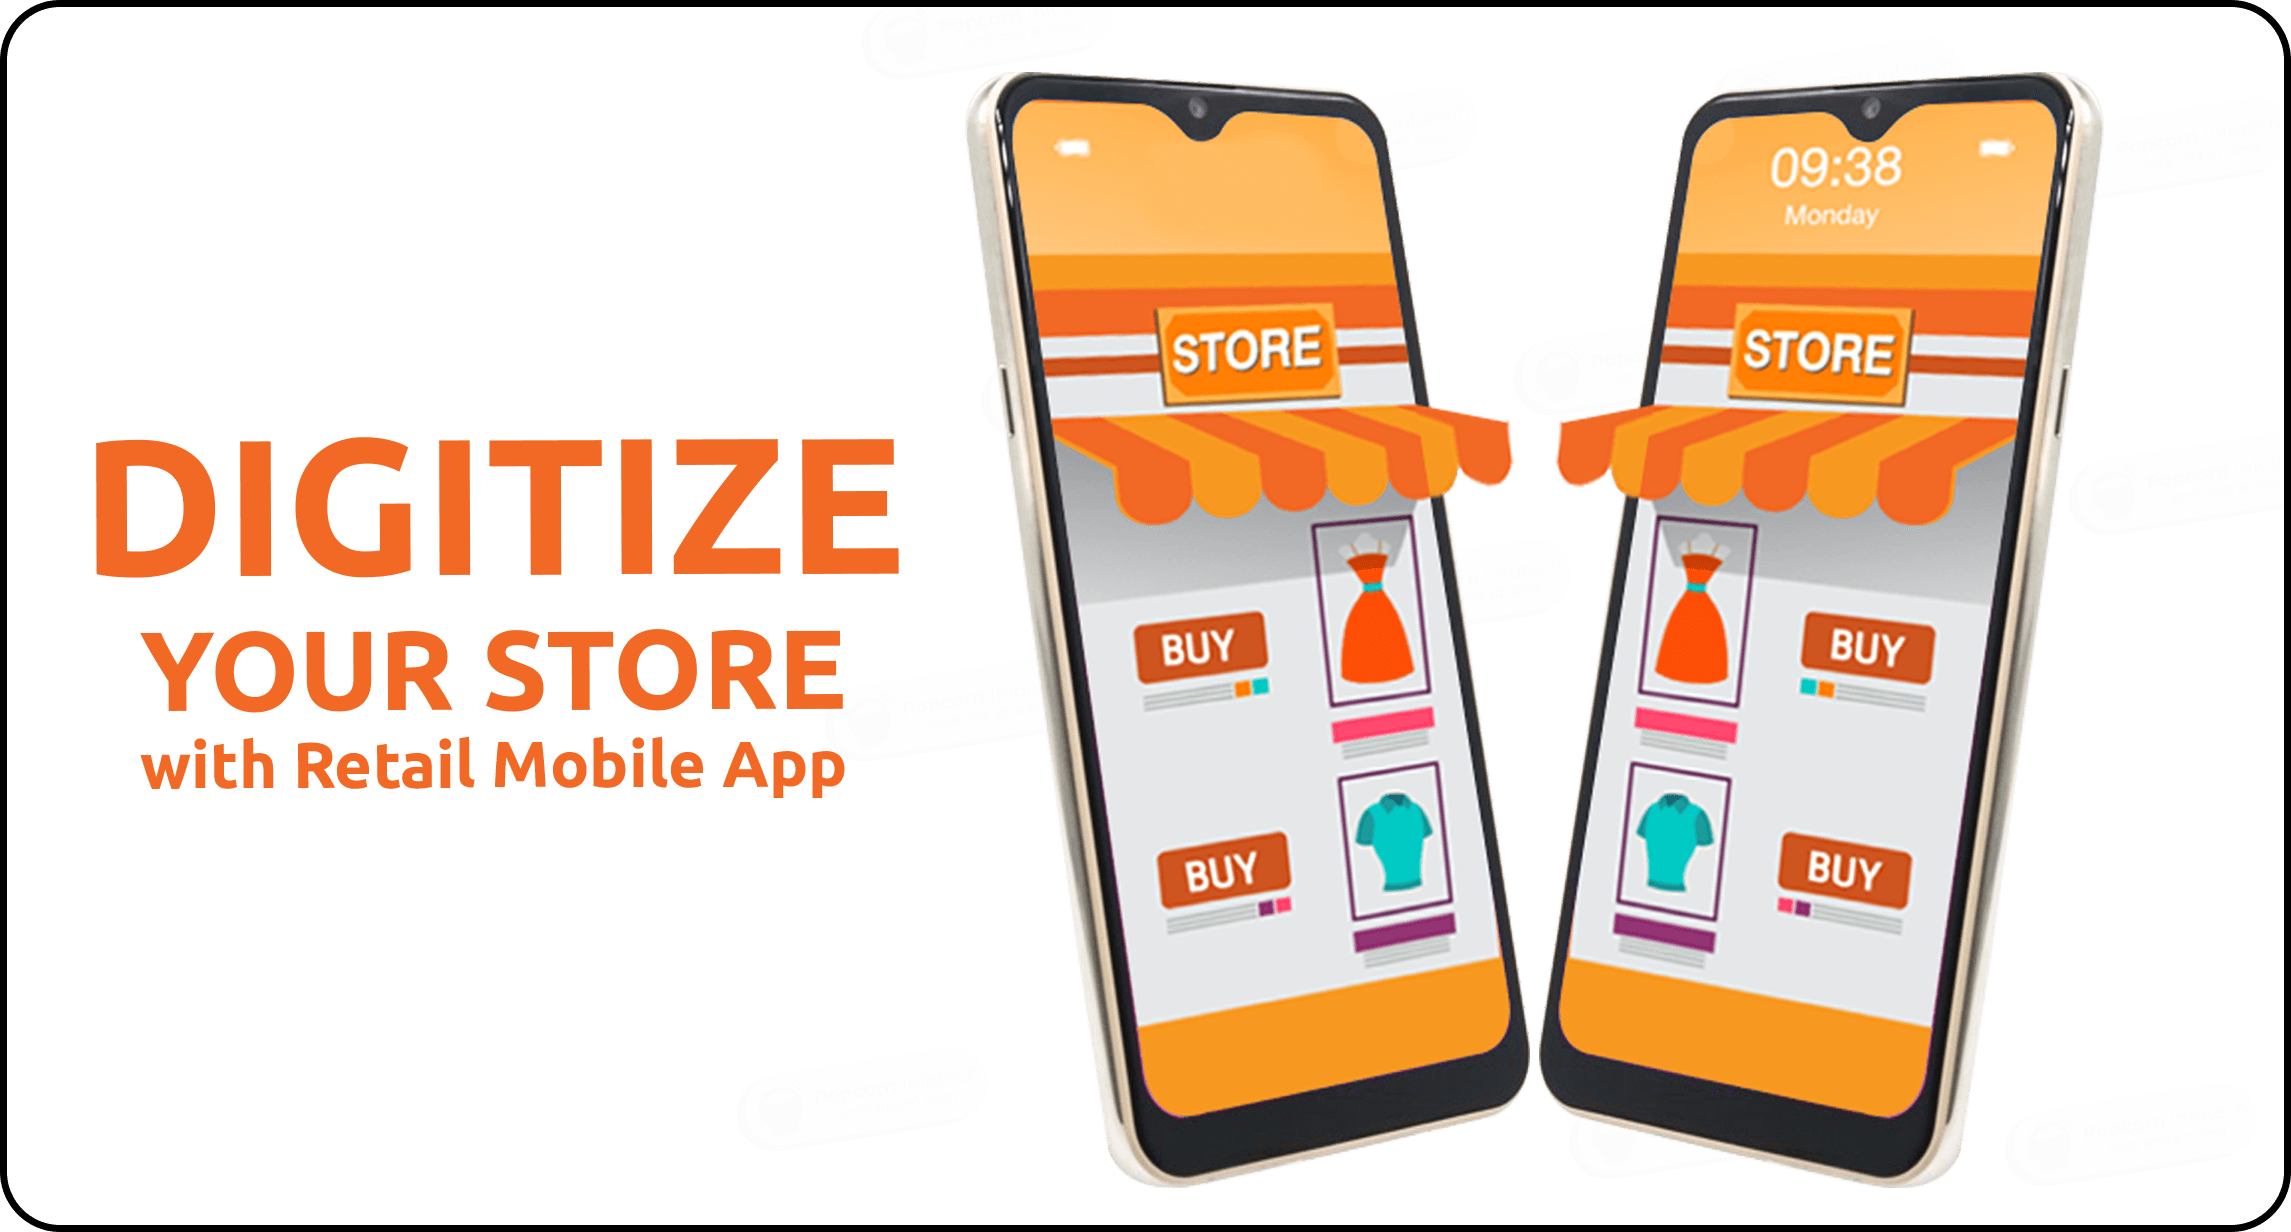 digitize your store image
